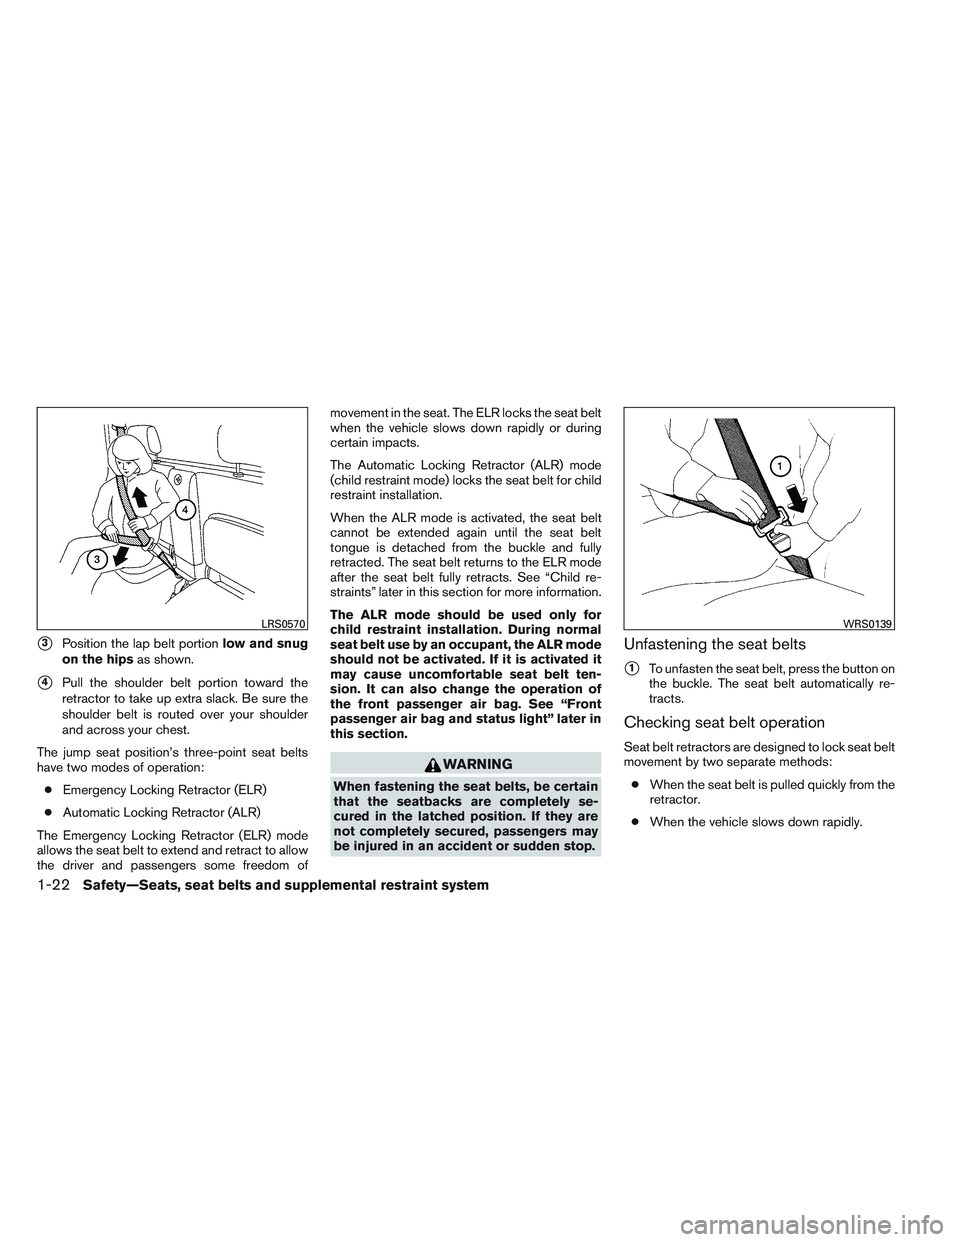 NISSAN FRONTIER 2012  Owner´s Manual 3Position the lap belt portionlow and snug
on the hips as shown.
4Pull the shoulder belt portion toward the
retractor to take up extra slack. Be sure the
shoulder belt is routed over your shoulder
a